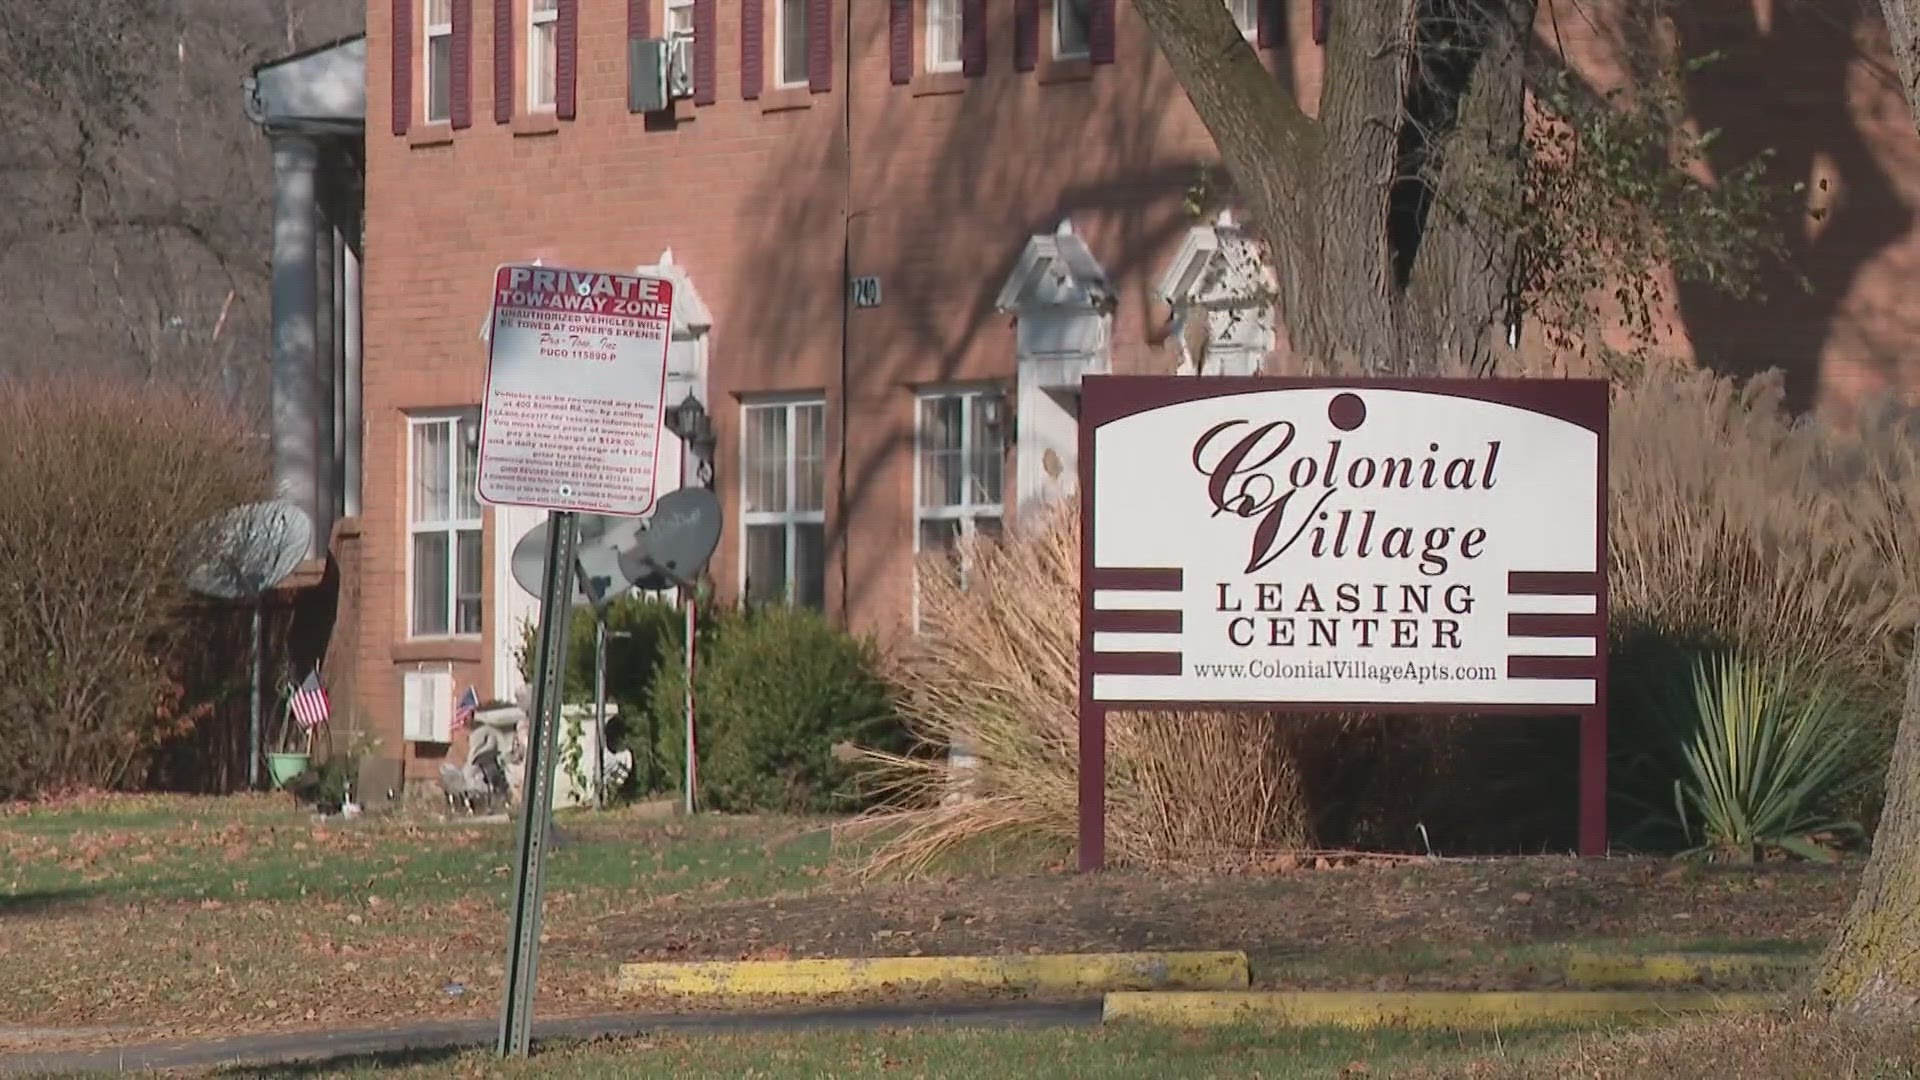 The city of Columbus is working to help the displaced residents find new permanent homes.